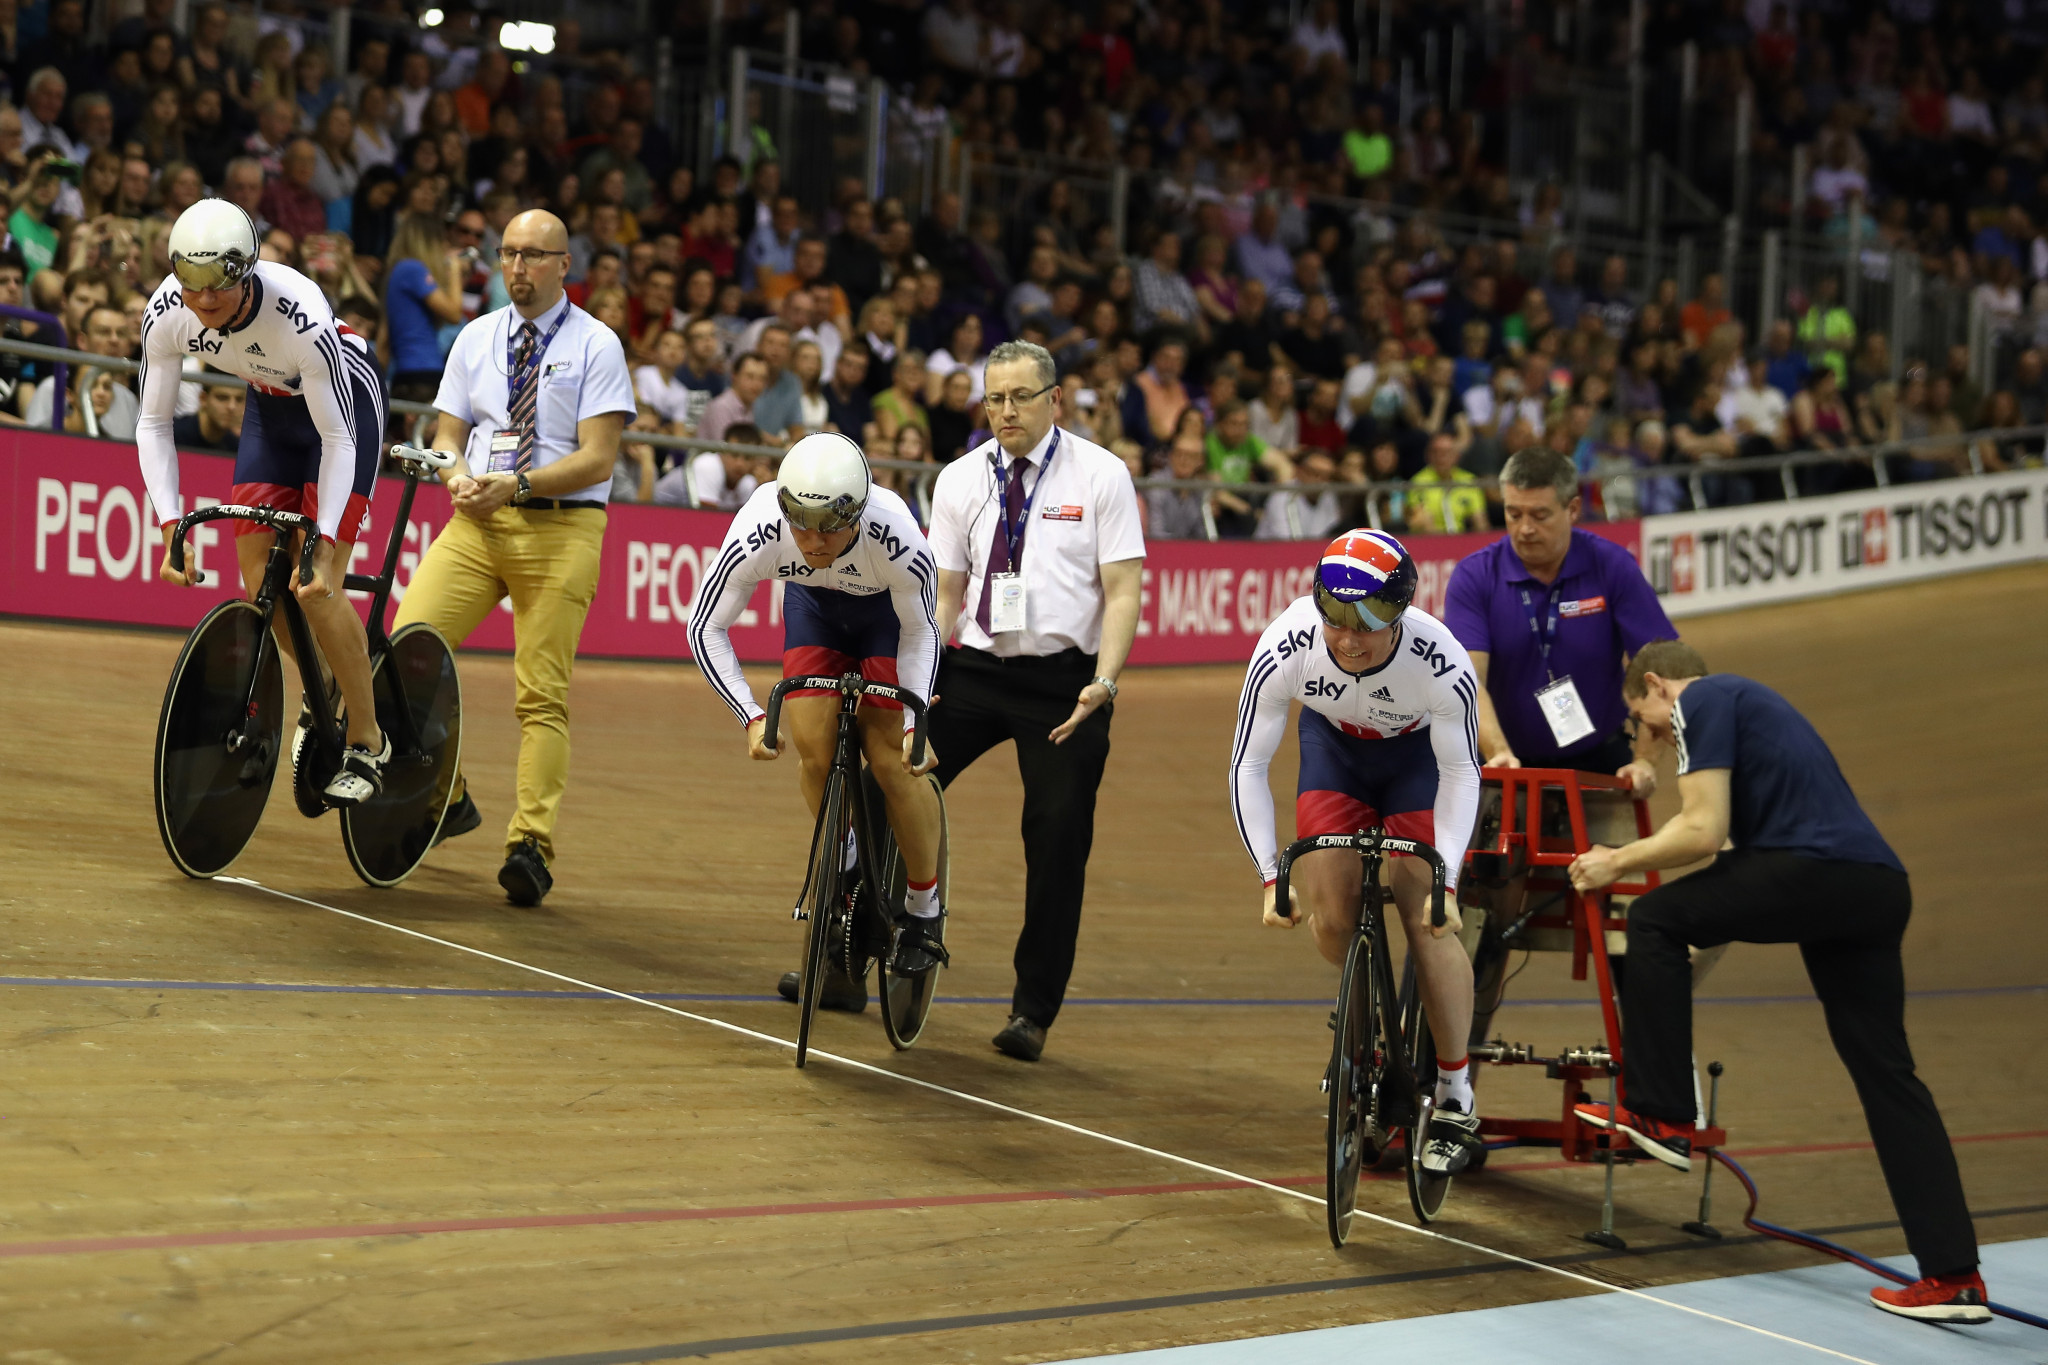 Track cycling competition will be held at the Sir Chris Hoy Velodrome next year ©Getty Images